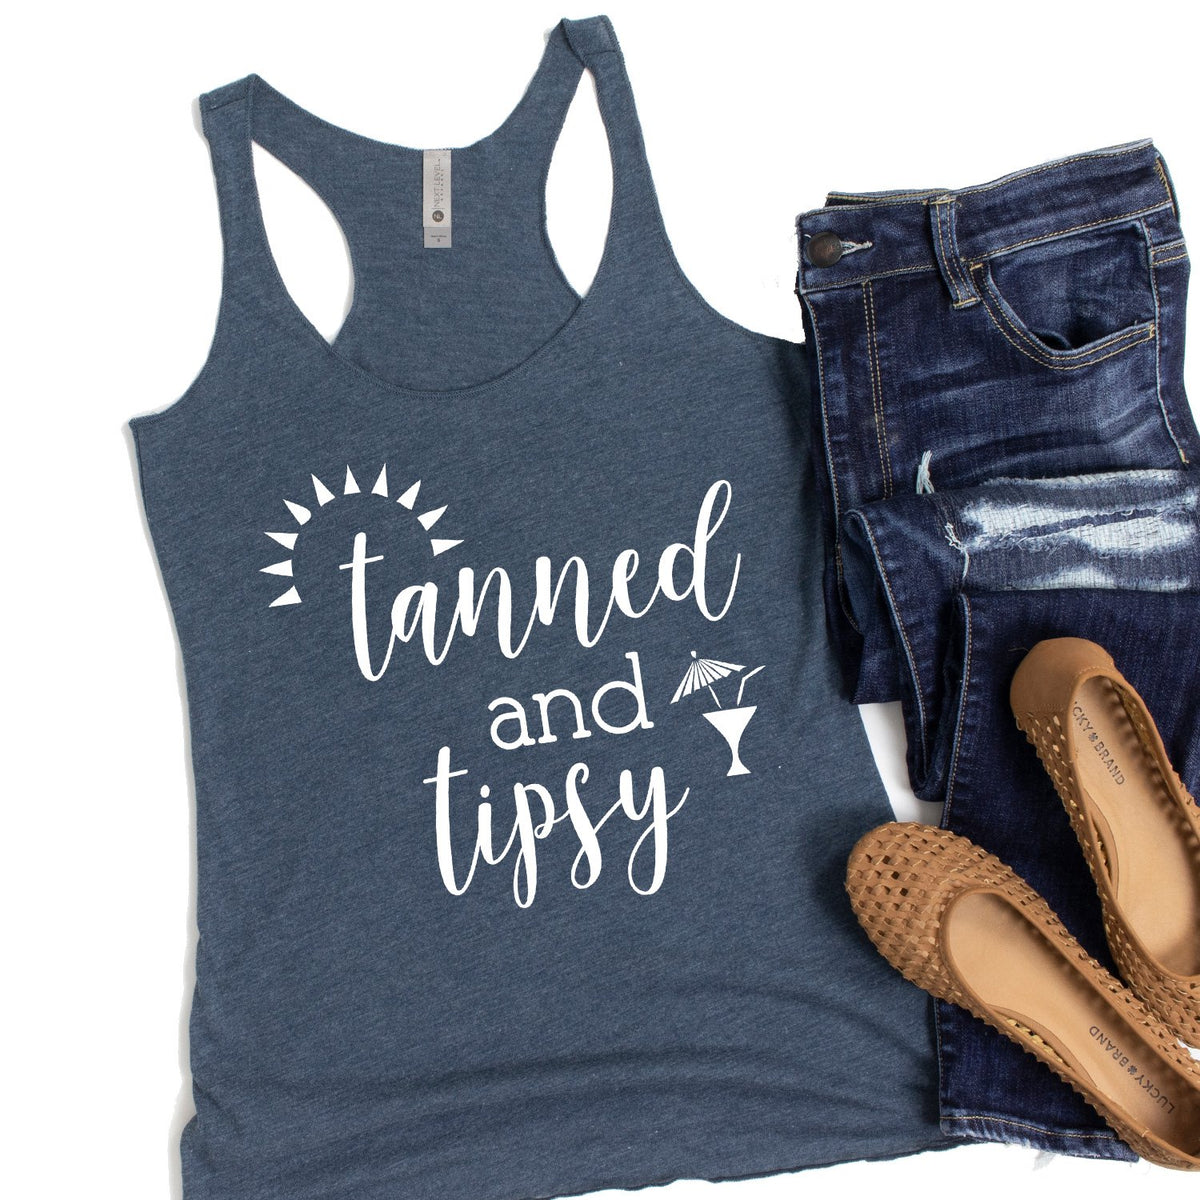 Tanned and Tipsy - Tank Top Racerback